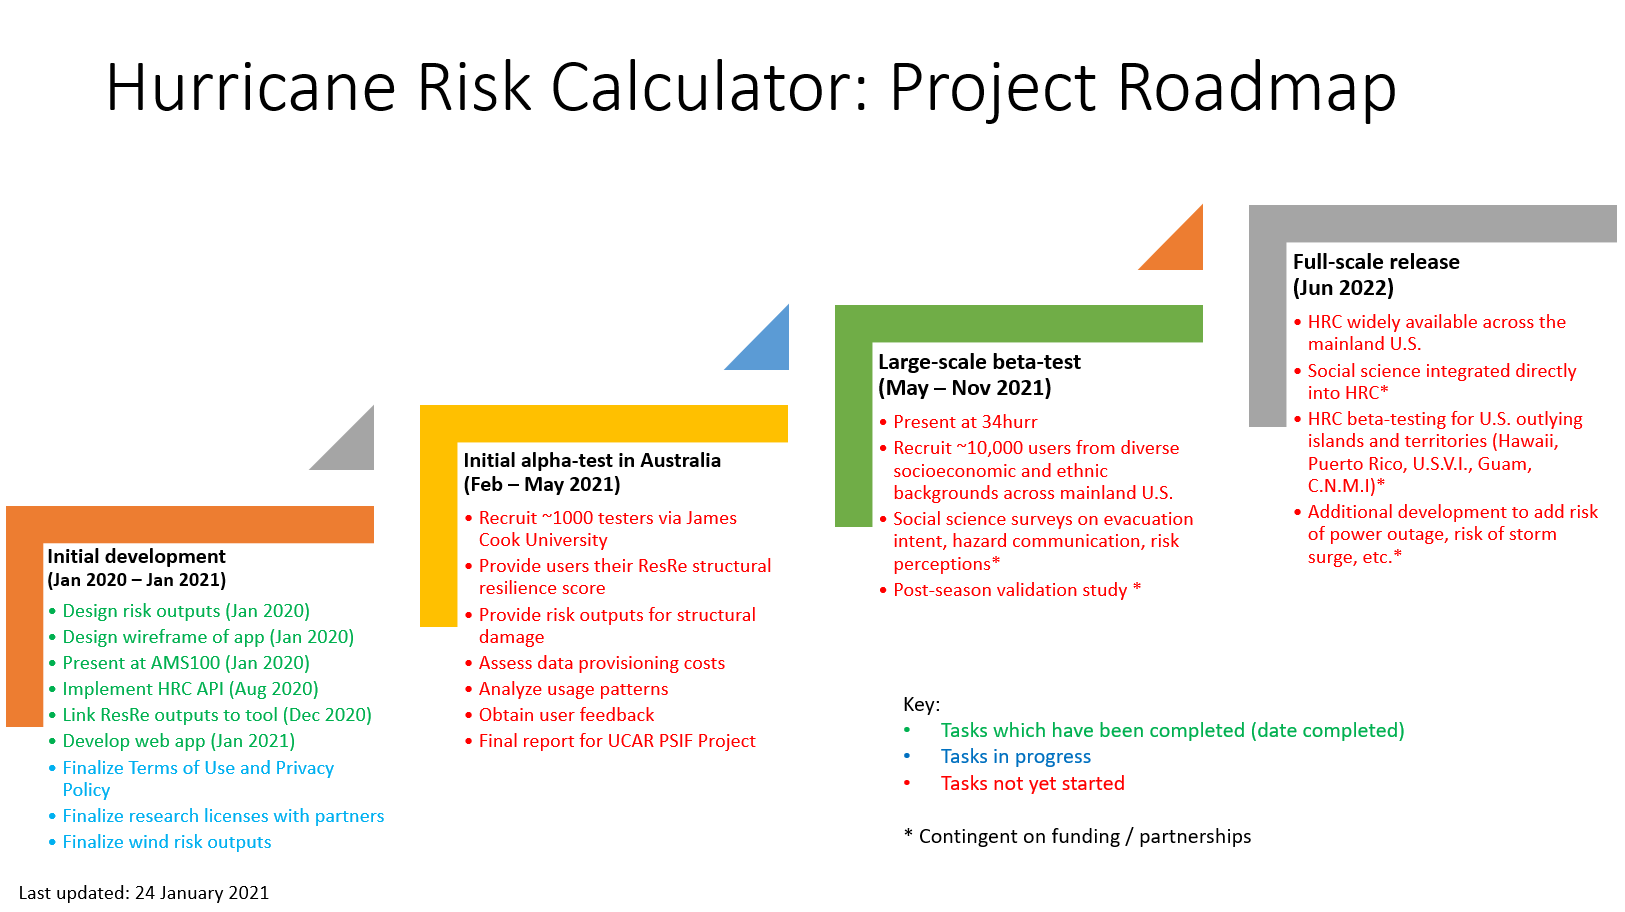 Graphic showing the development roadmap for the Hurricane Risk Calculator project.